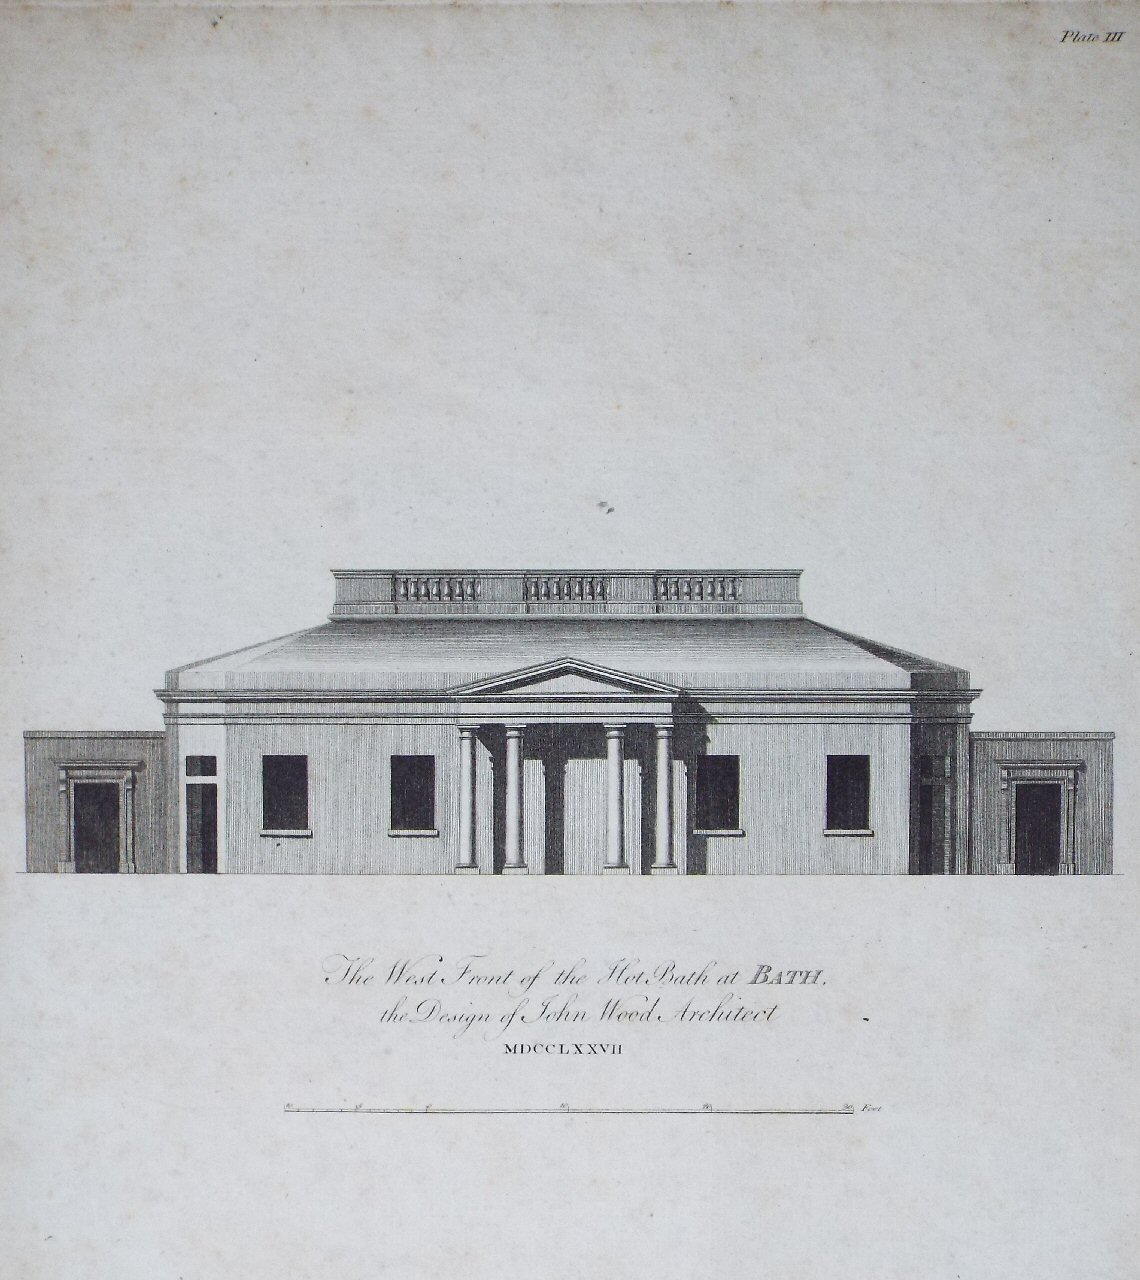 Print - The West Front of the Hot Bath at Bath, the Design of John Wood, Architect. MDCCLXXVII